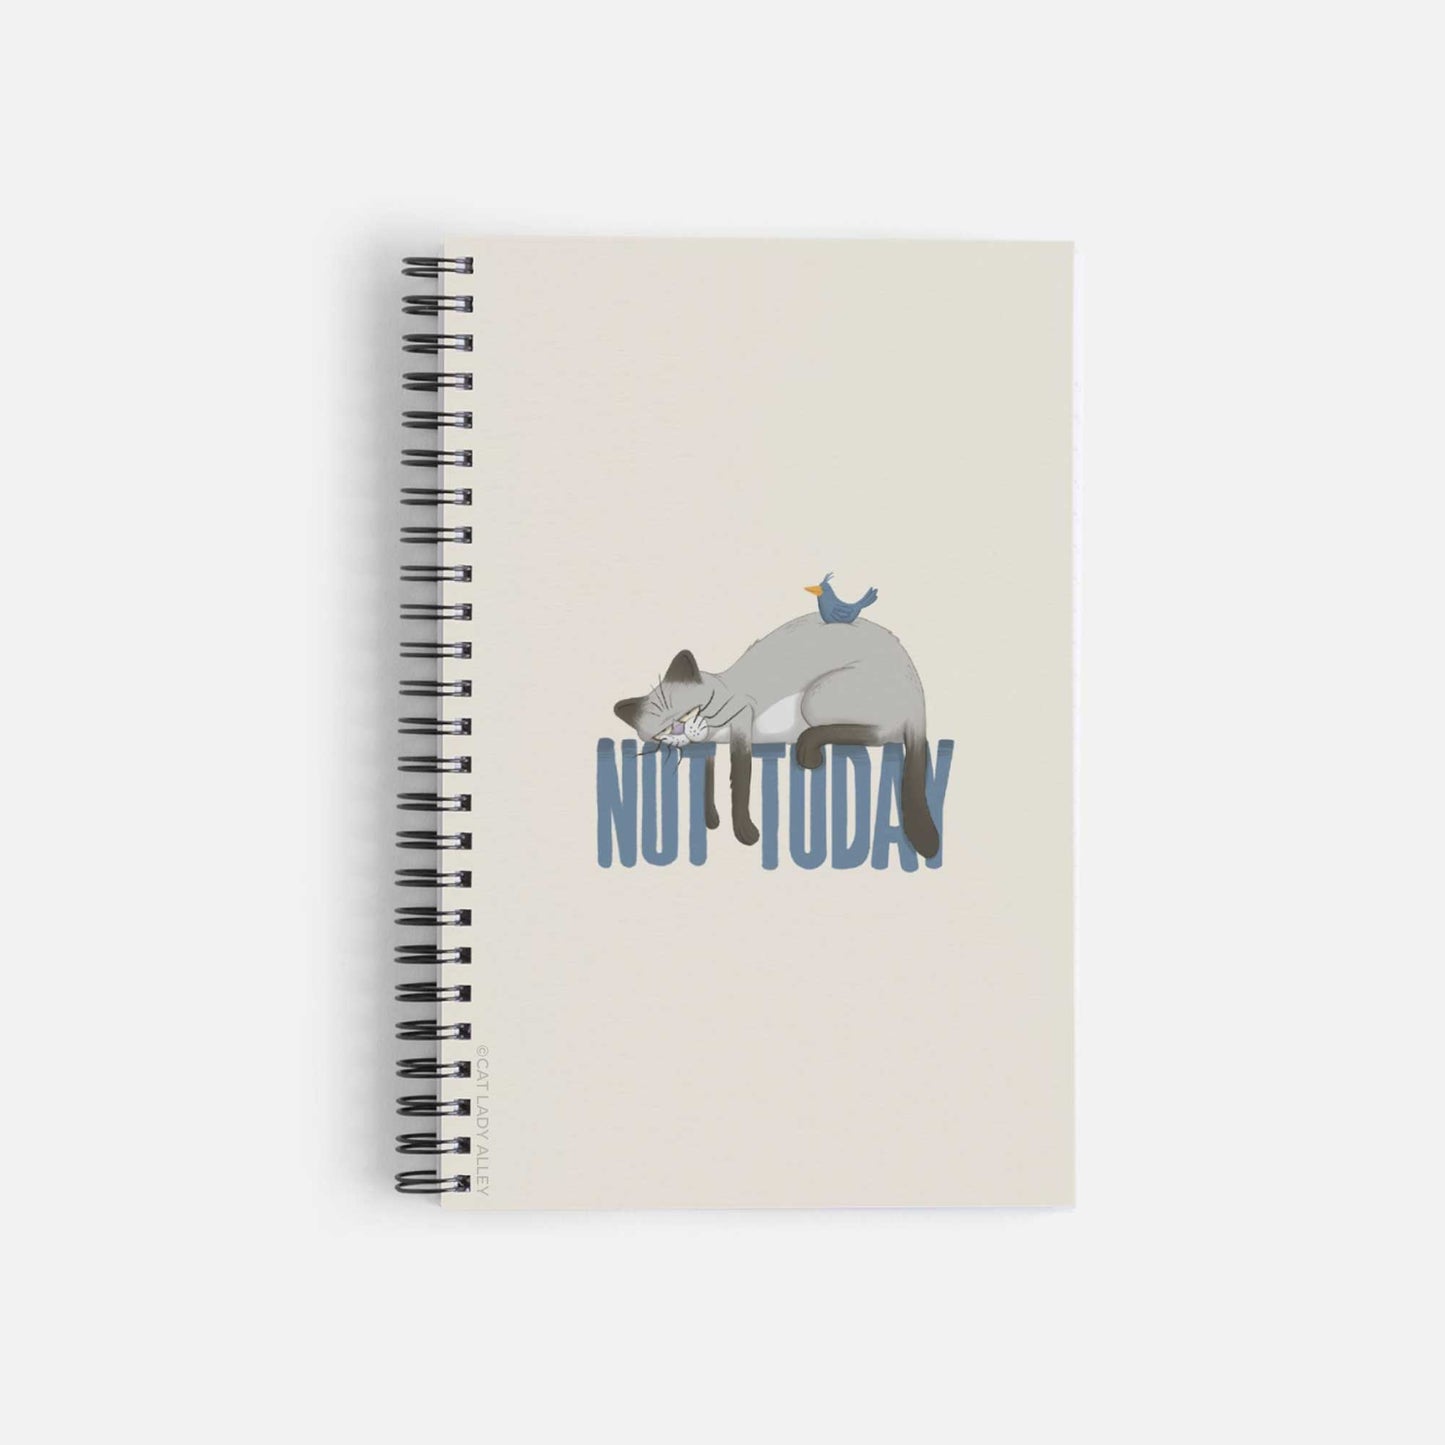 Not Today Spiral Notebook front cover